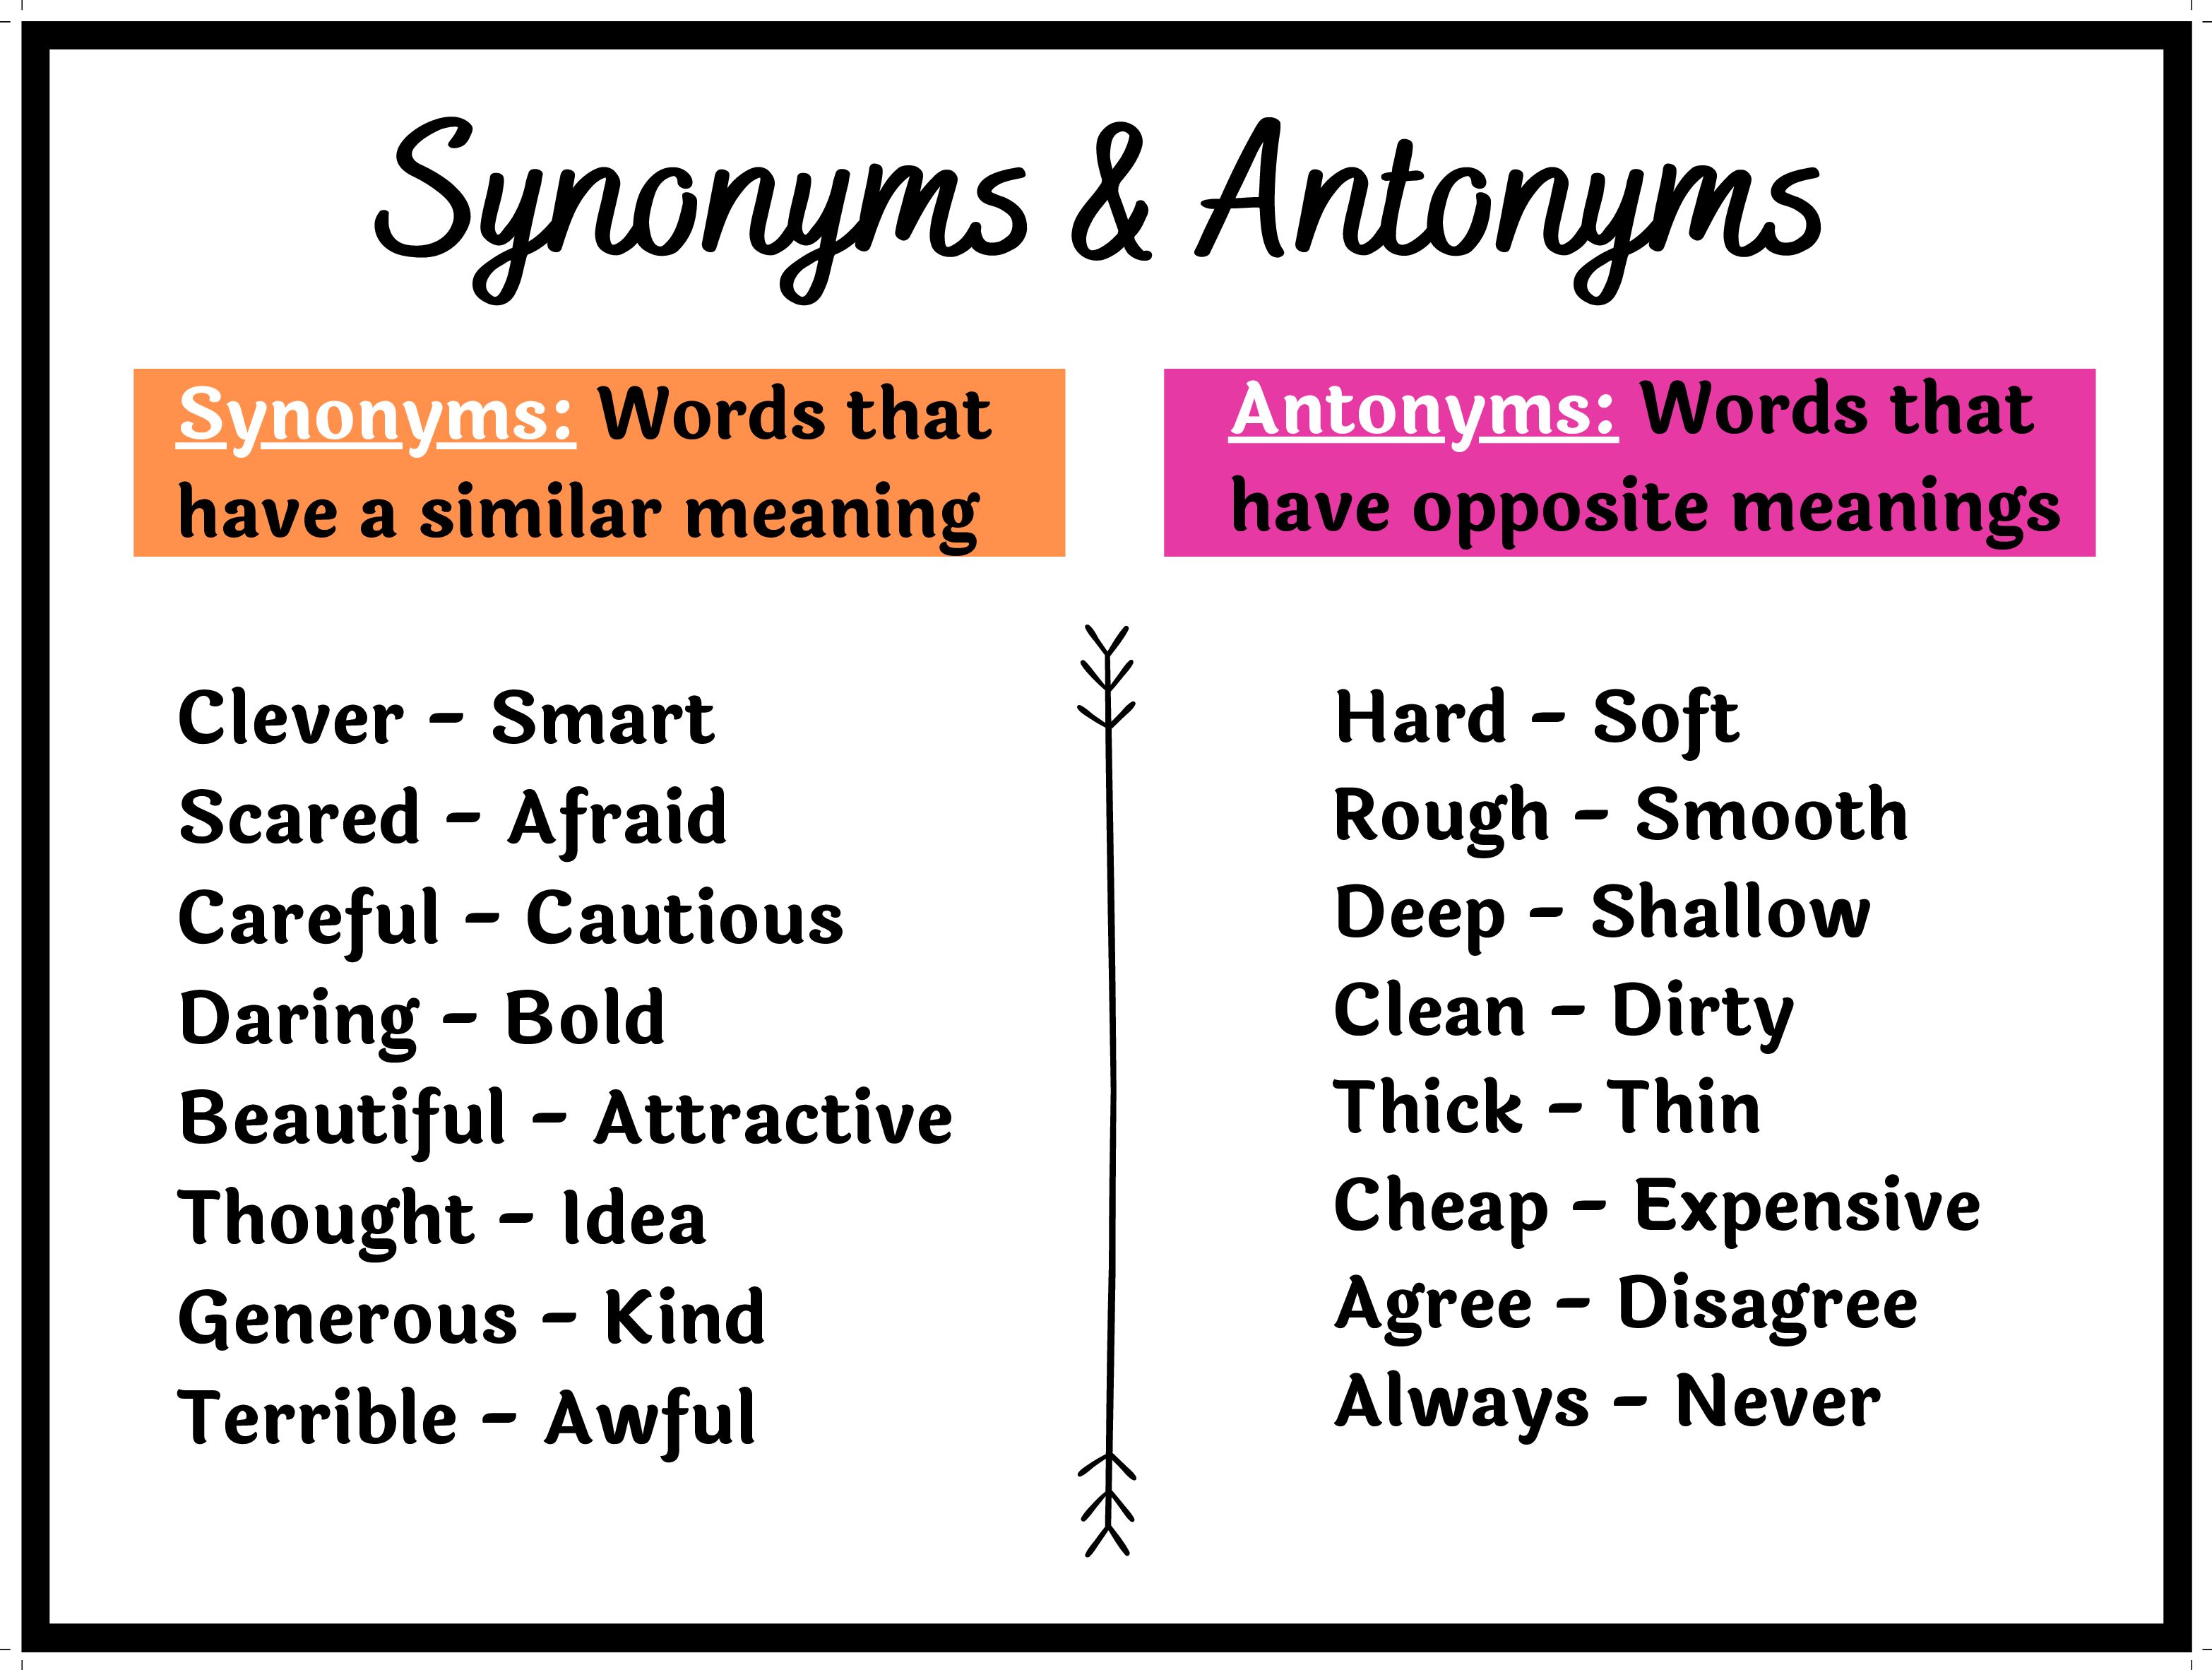 54 Synonyms & Antonyms For Attractive